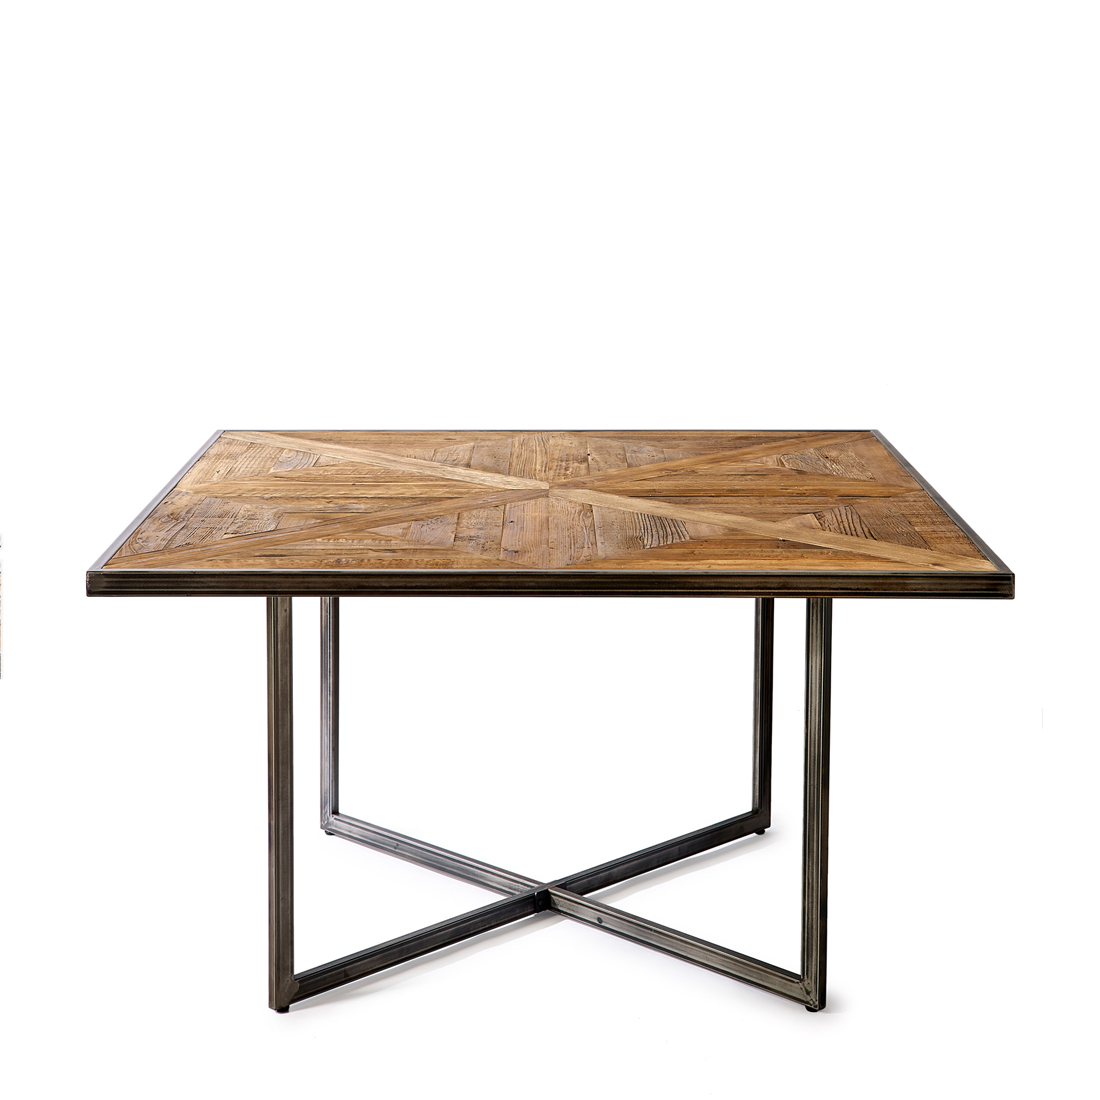 Le Bar American Dining Table 140